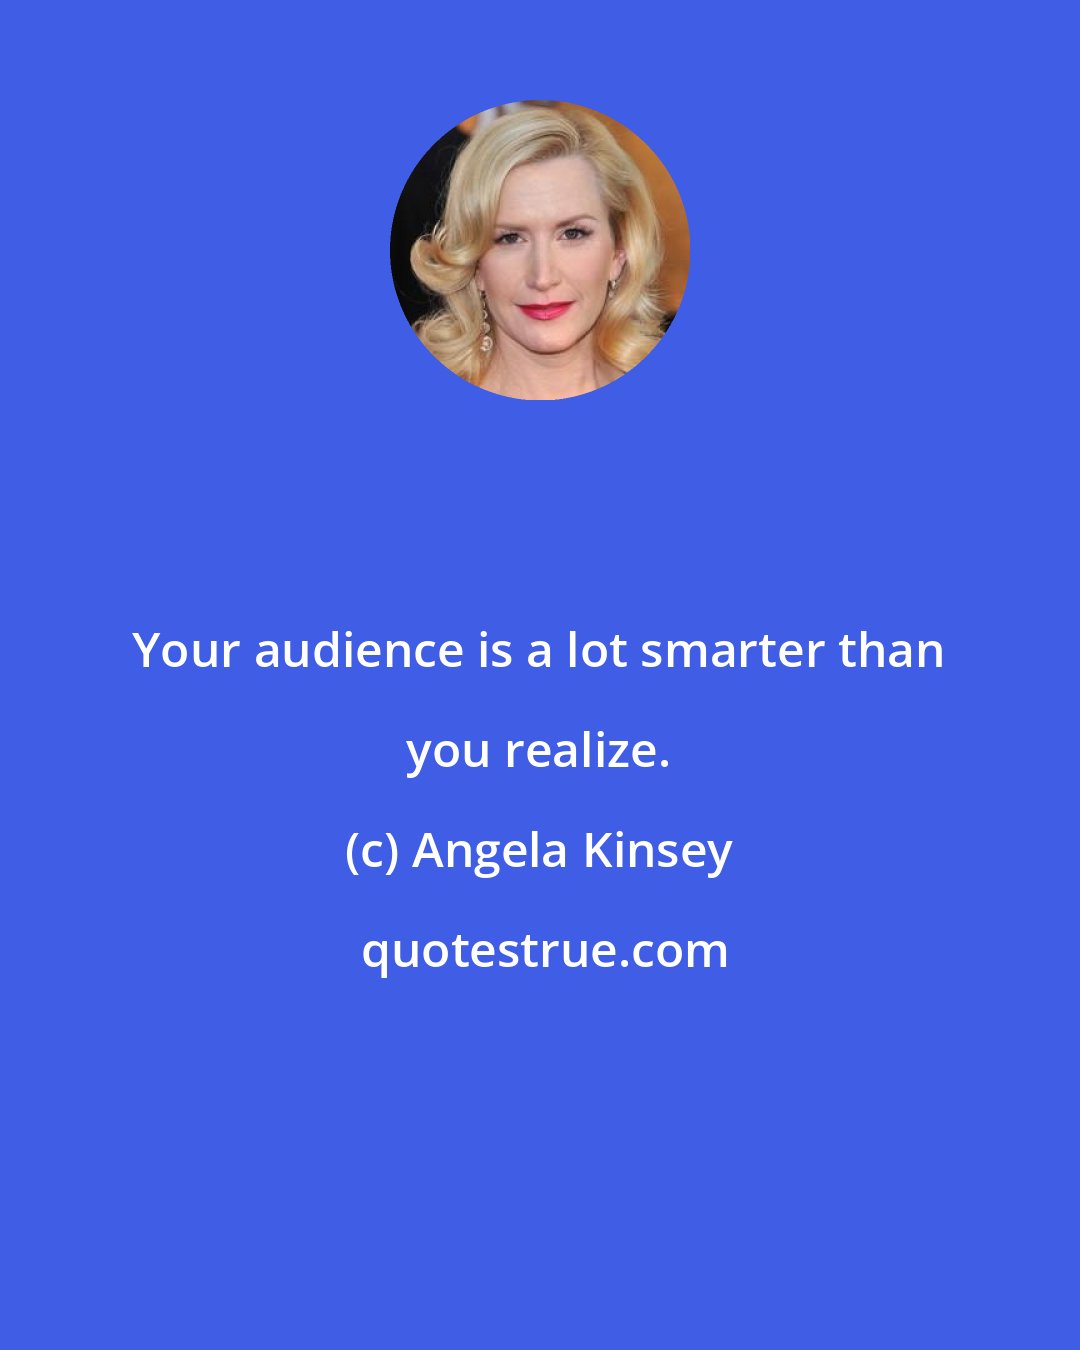 Angela Kinsey: Your audience is a lot smarter than you realize.